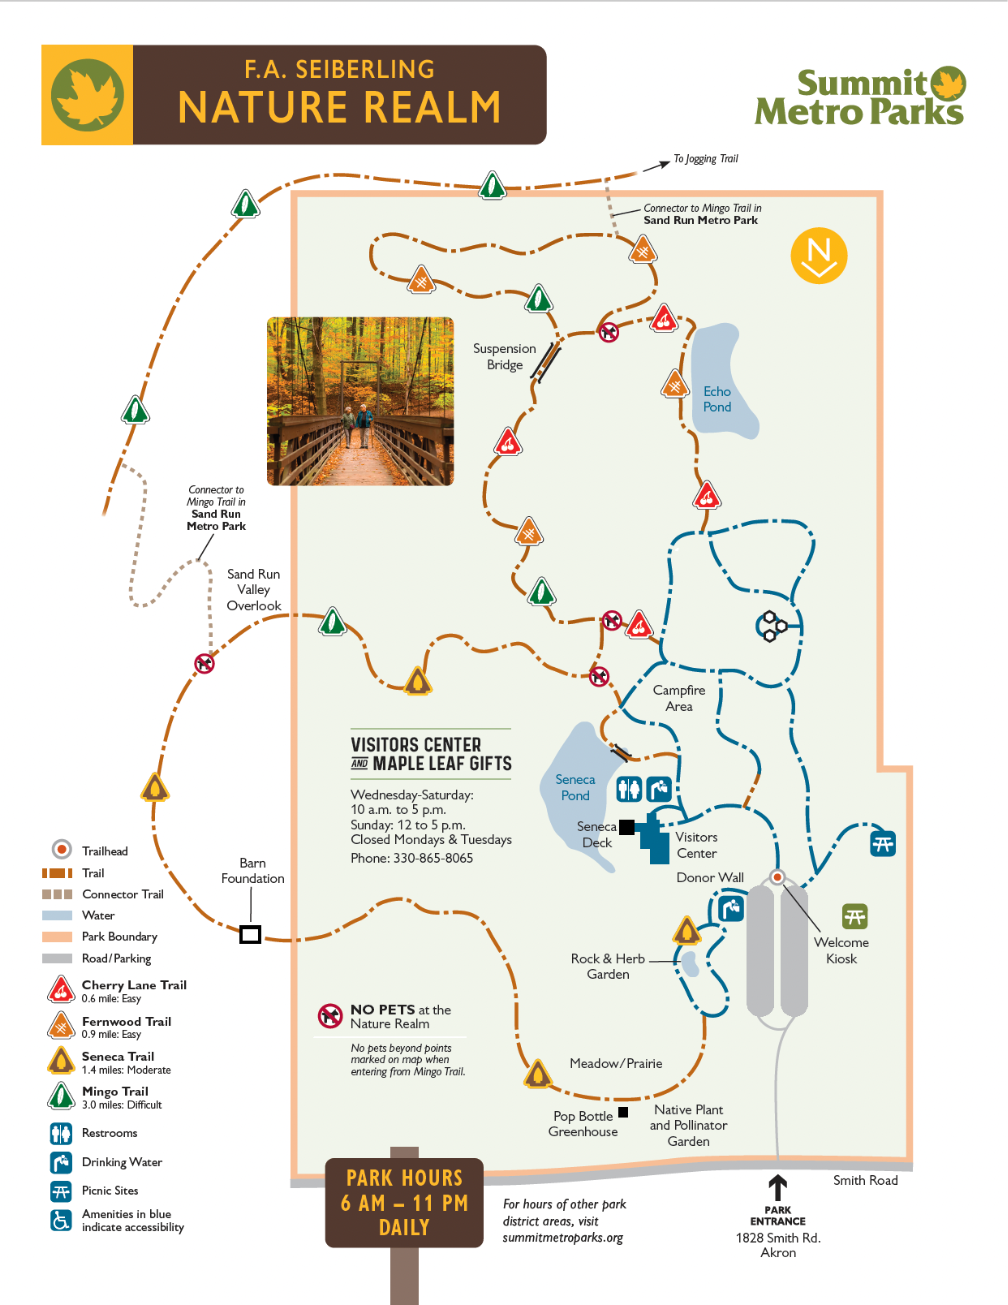 F.A. Seiberling Nature Realm Map